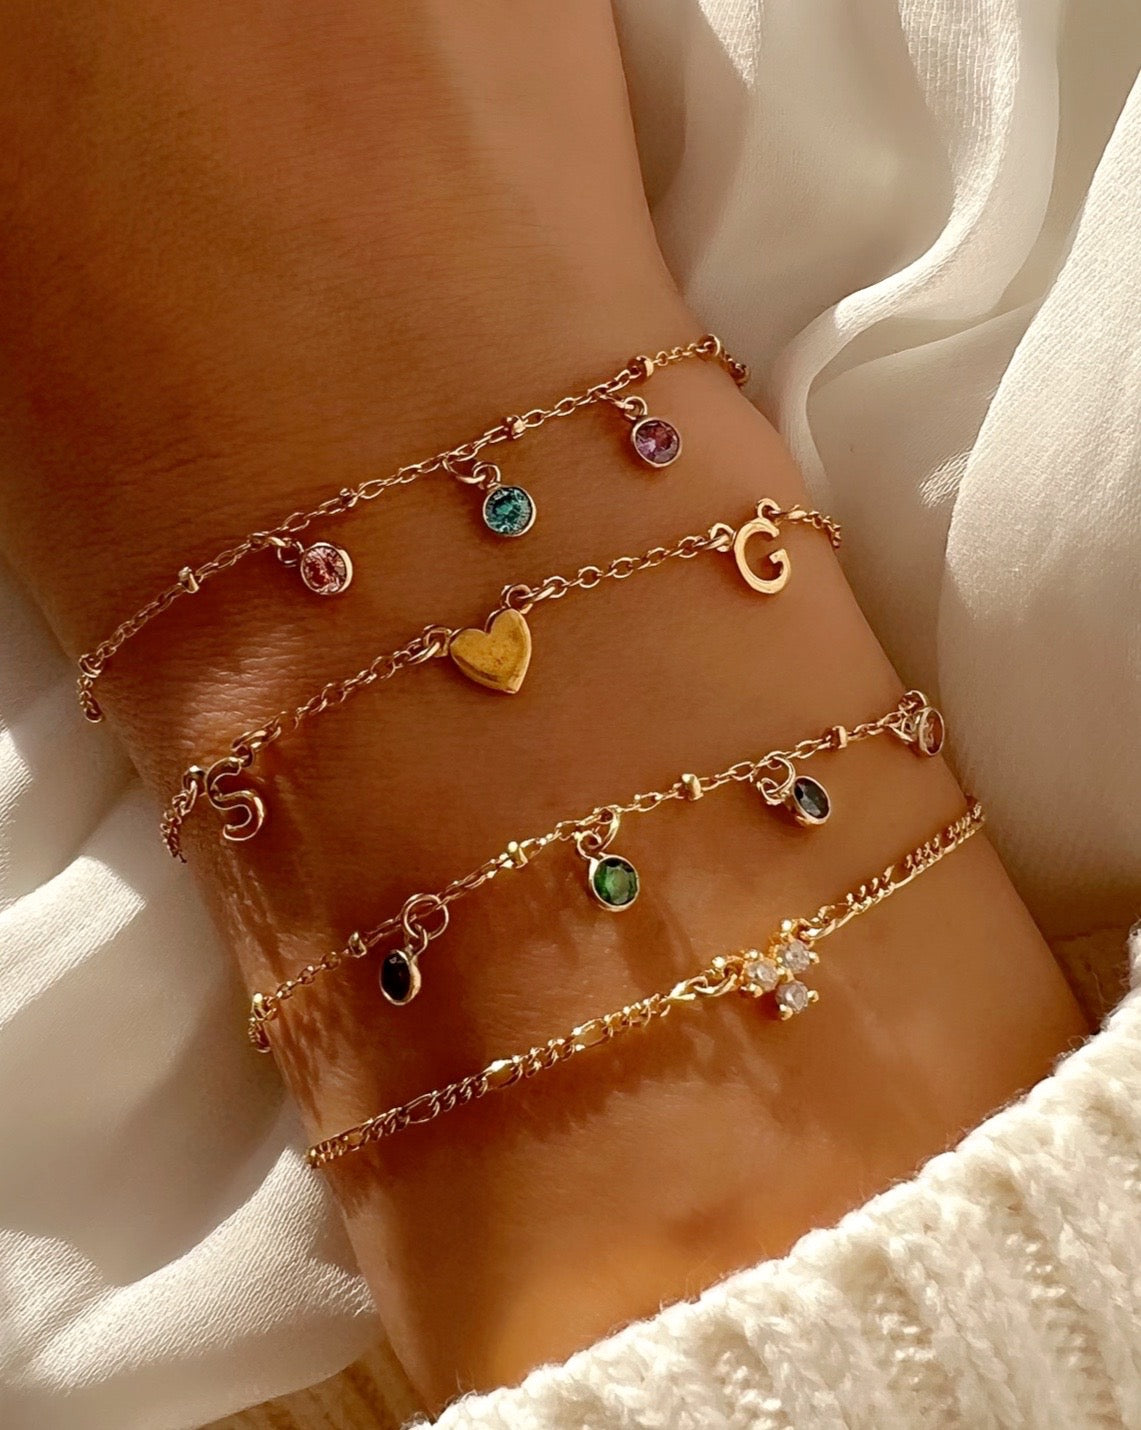 Gold Petite Birthstone Bracelet Colours and Months, including January Garnet, February Amethyst, March Aquamarine, April Diamond, May Emerald, June Alexandrite, July Ruby, August Peridot, September Sapphire, October Tourmaline, November Citrine and December Topaz Cubic Zirconia Crystals on a model 